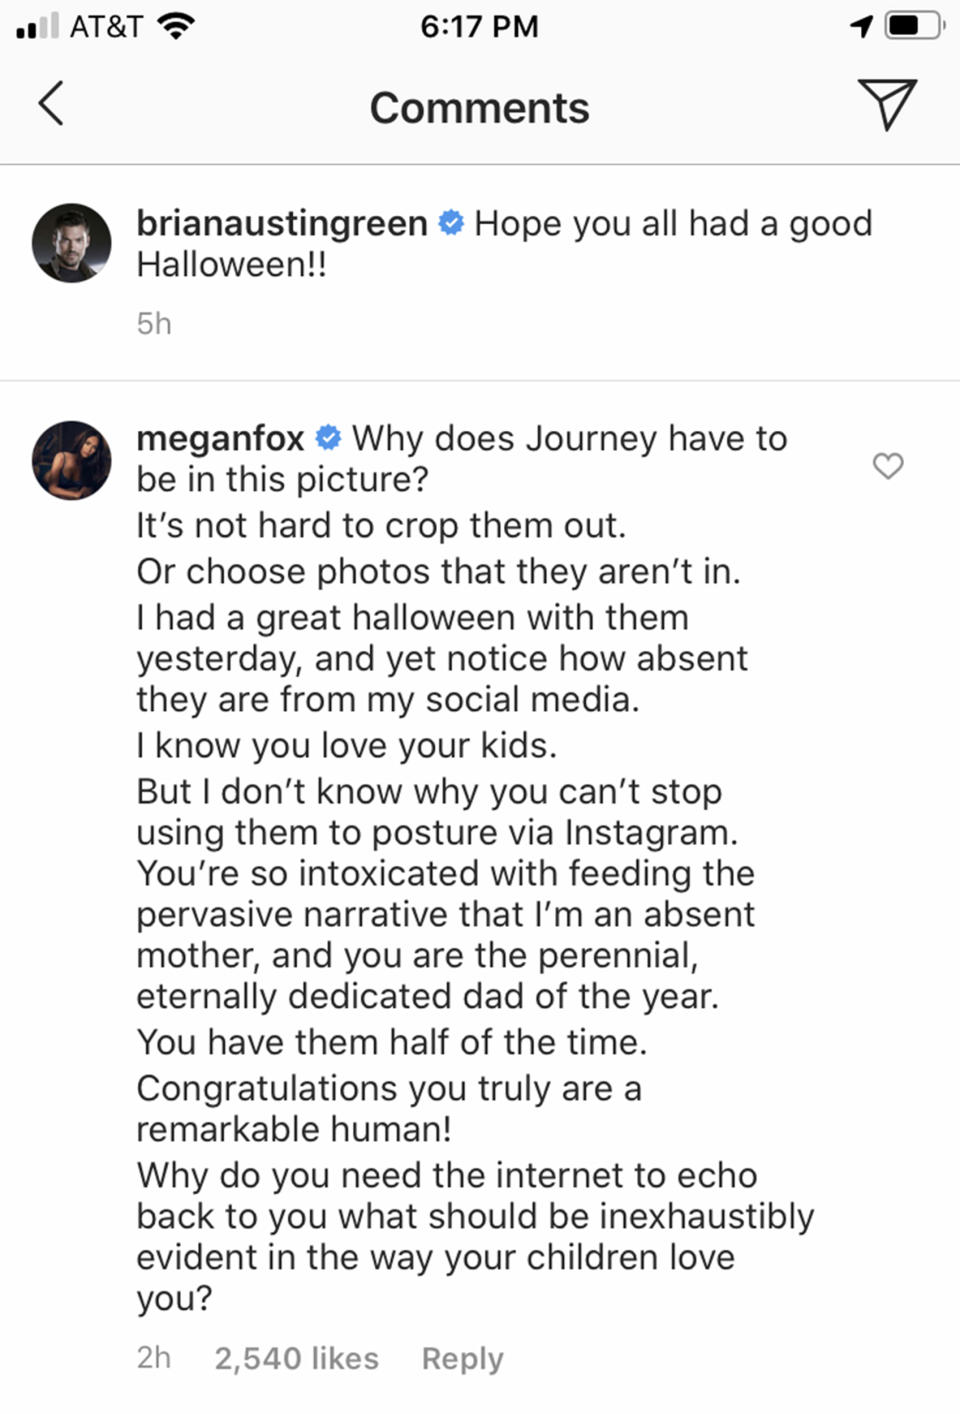 Megan Fox criticized ex Brian Austin Green for sharing a Halloween photo of their son. The post was later deleted. (brianaustingreen/instagram)